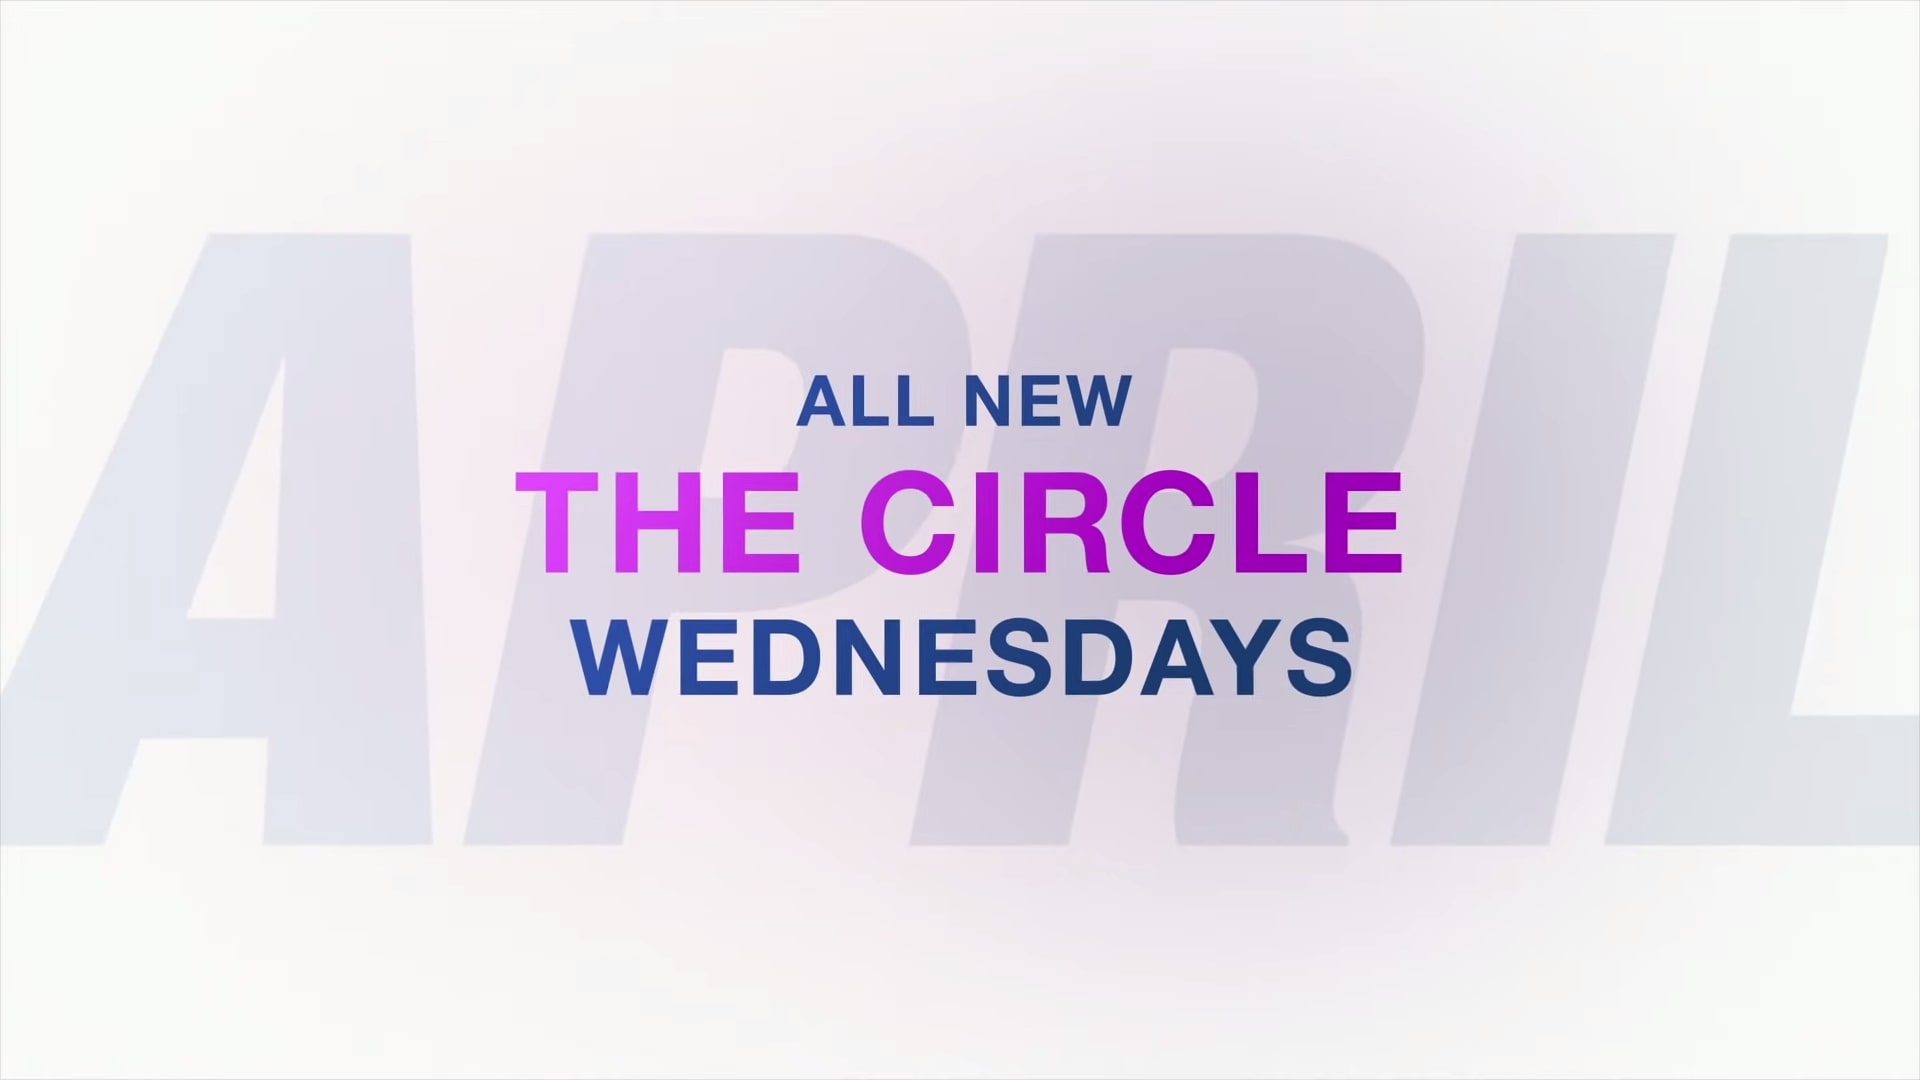 Netflix The Circle Season 2 Trailer, Netflix Game-Show, Coming to Netflix in April 2021